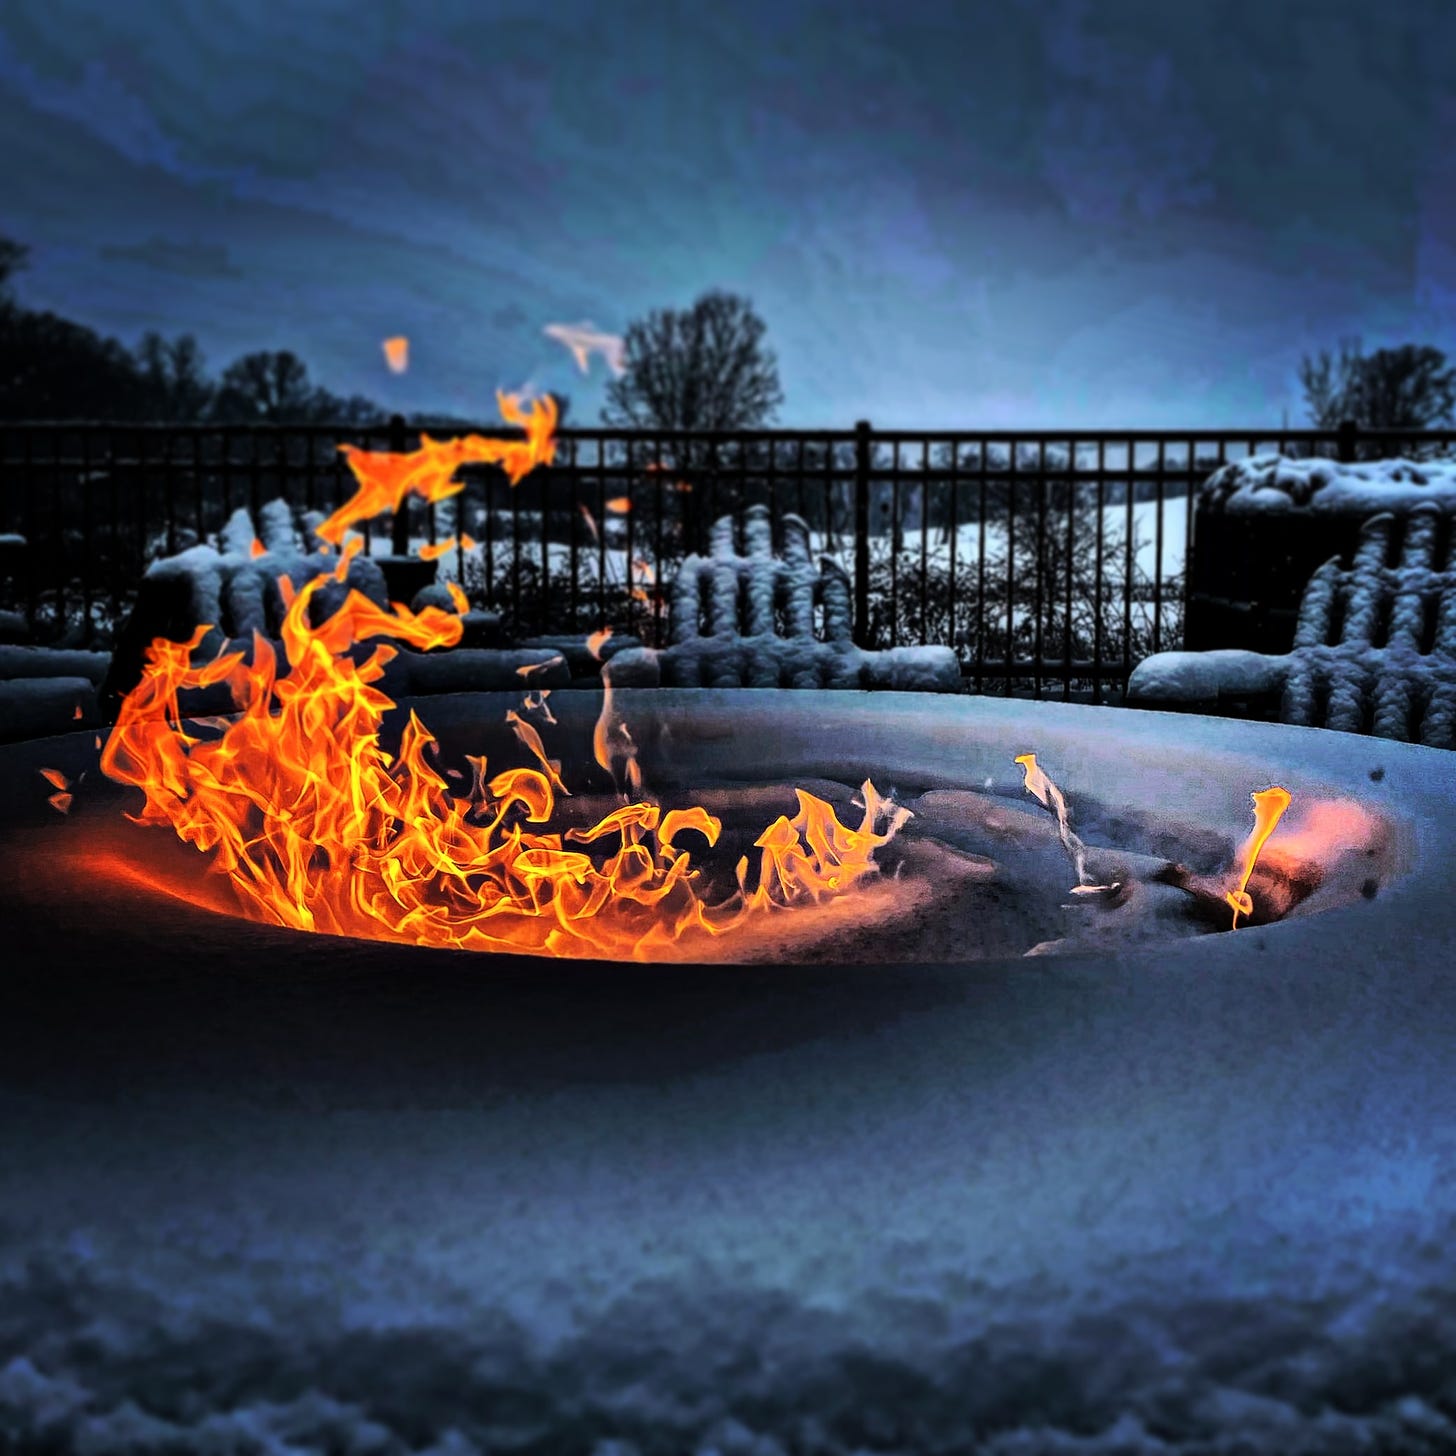 Fire Pit in the Snow- Image by Shawn R. Metivier, 2022